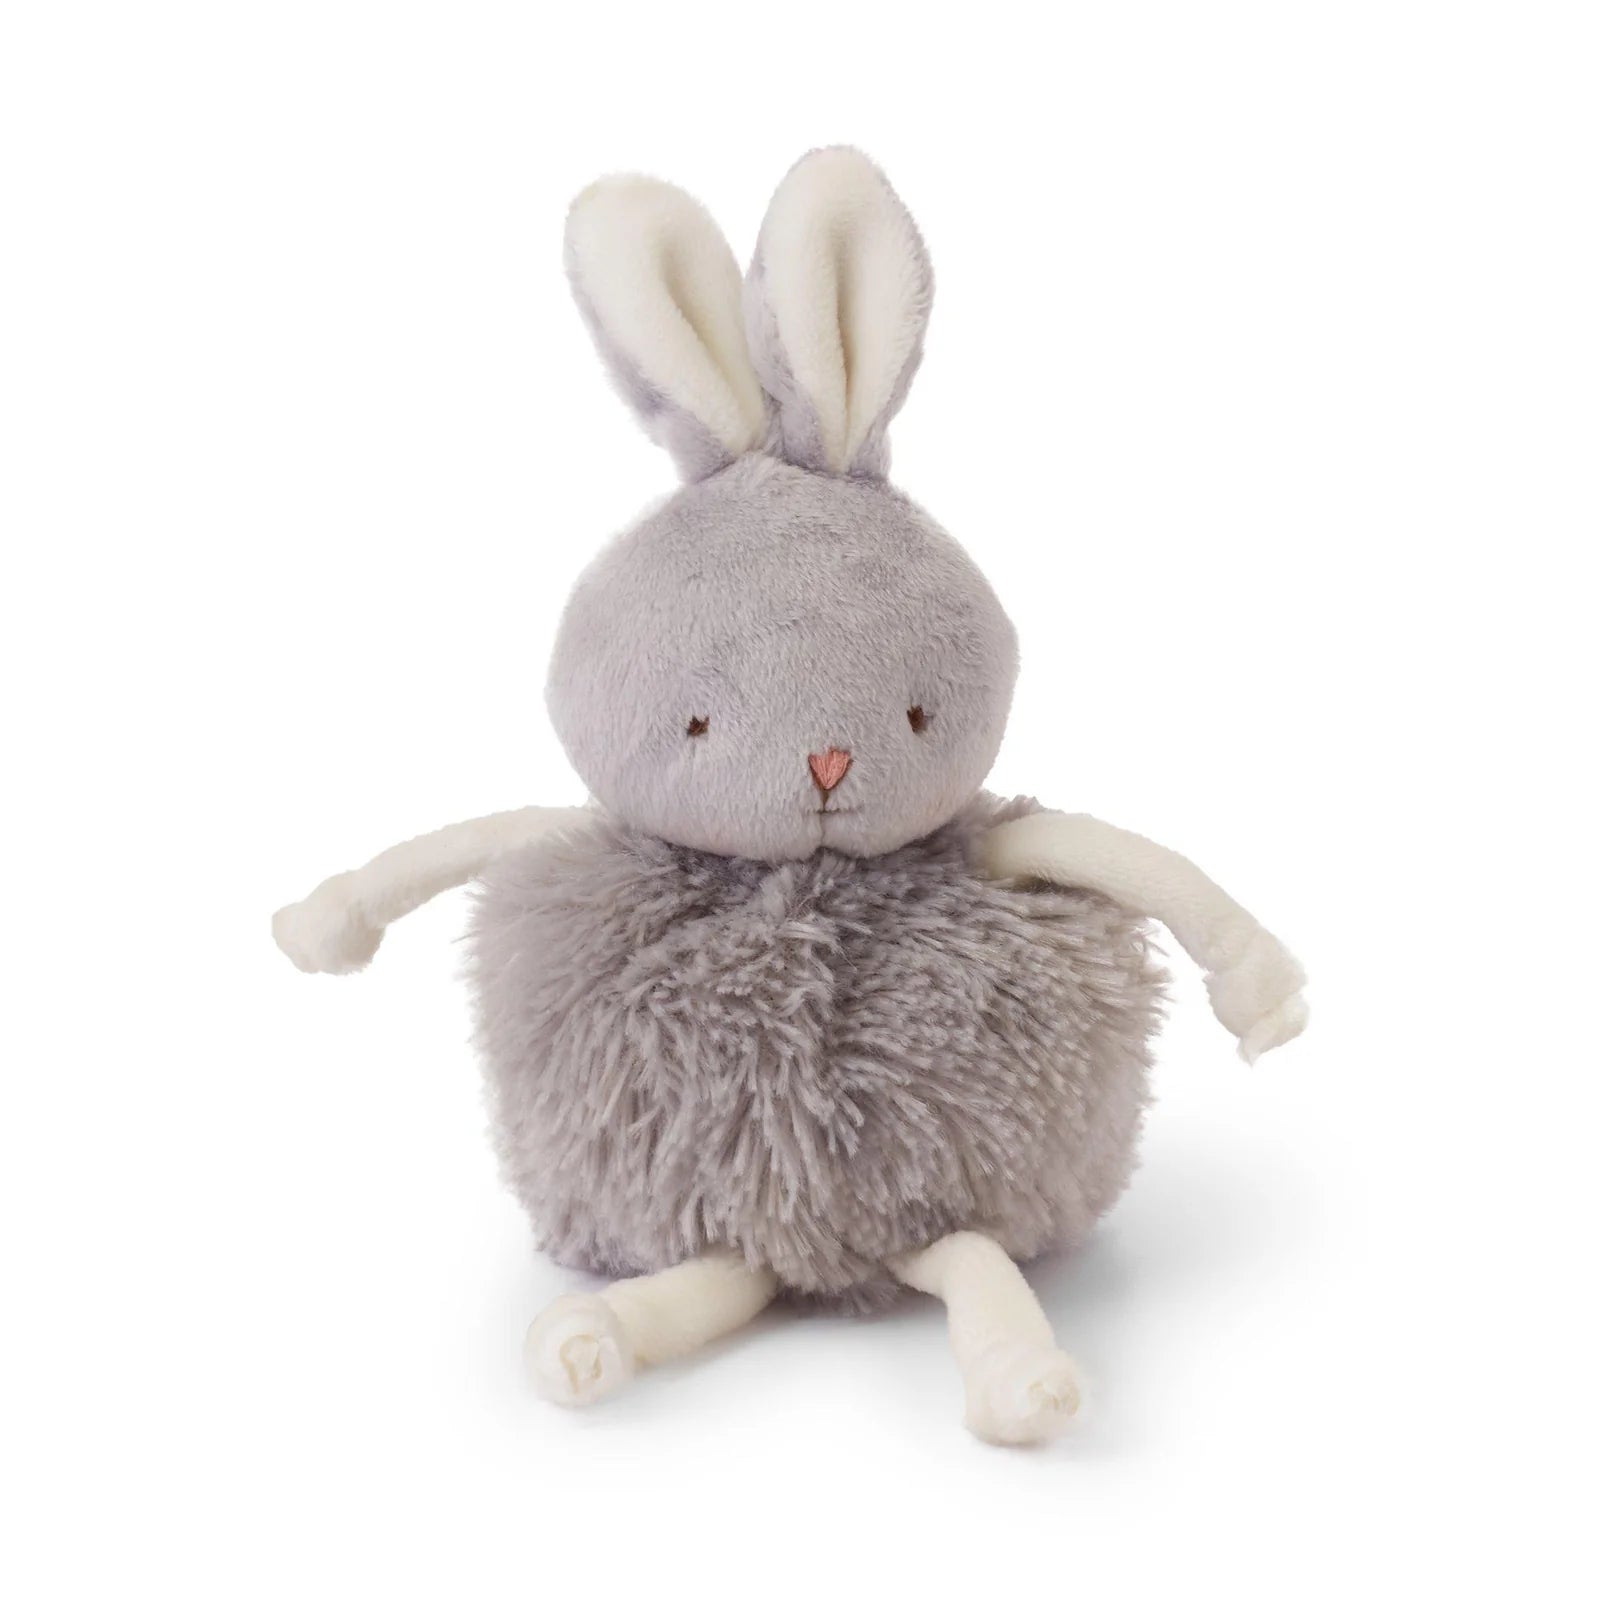 ROLY POLY BLOOM - GRAY BUNNY